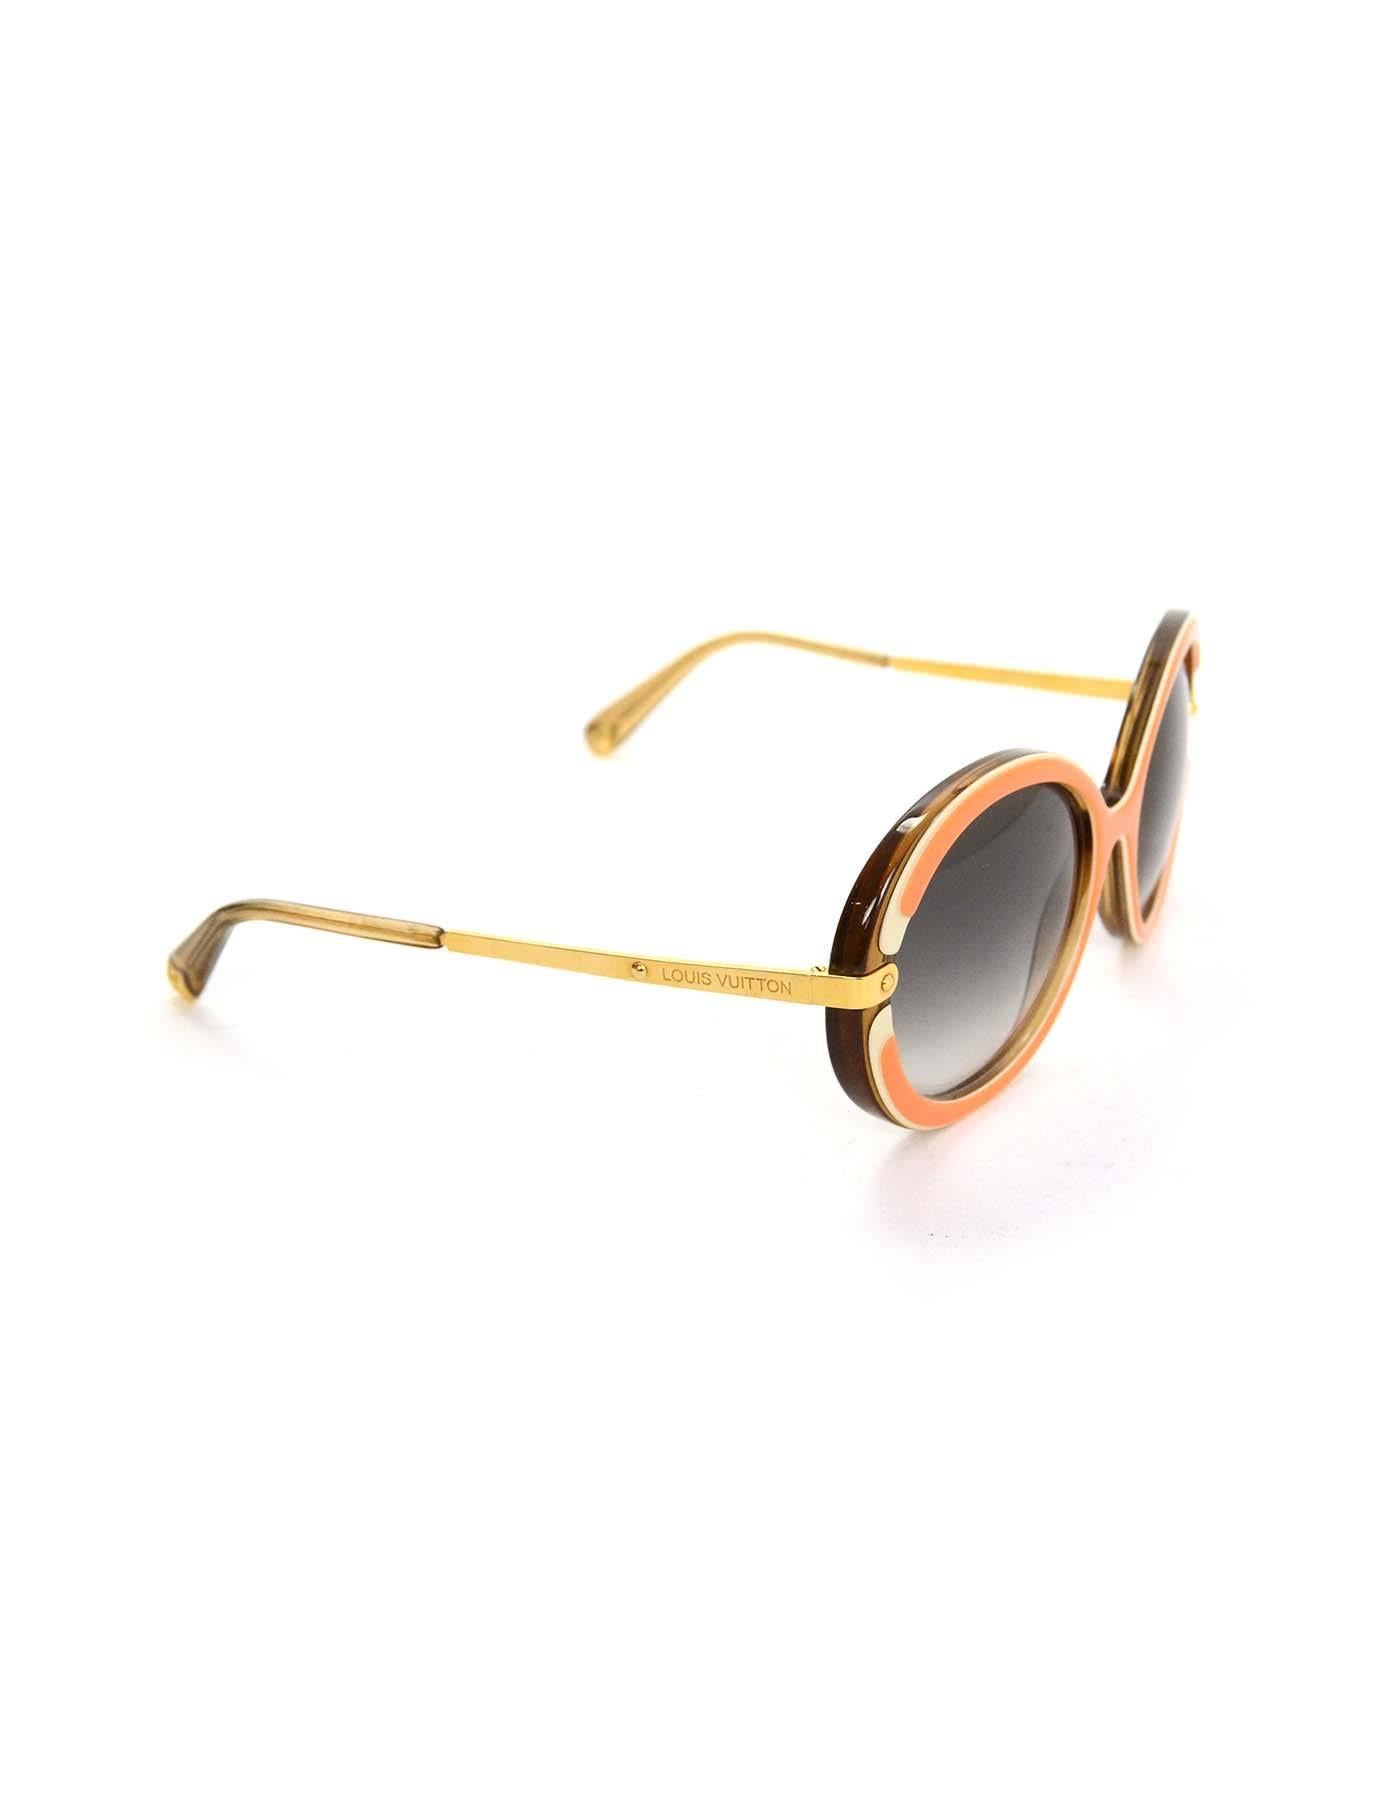 Louis Vuitton Orange & White Resin Anthea Sunglasses 
Features bronze glitter resin framing inside of lenses
Made In: Italy
Color: Orange, white and goldtone
Materials: Resin and metal
Stamp: Z0426W 57 18
Overall Condition: Excellent pre-owned